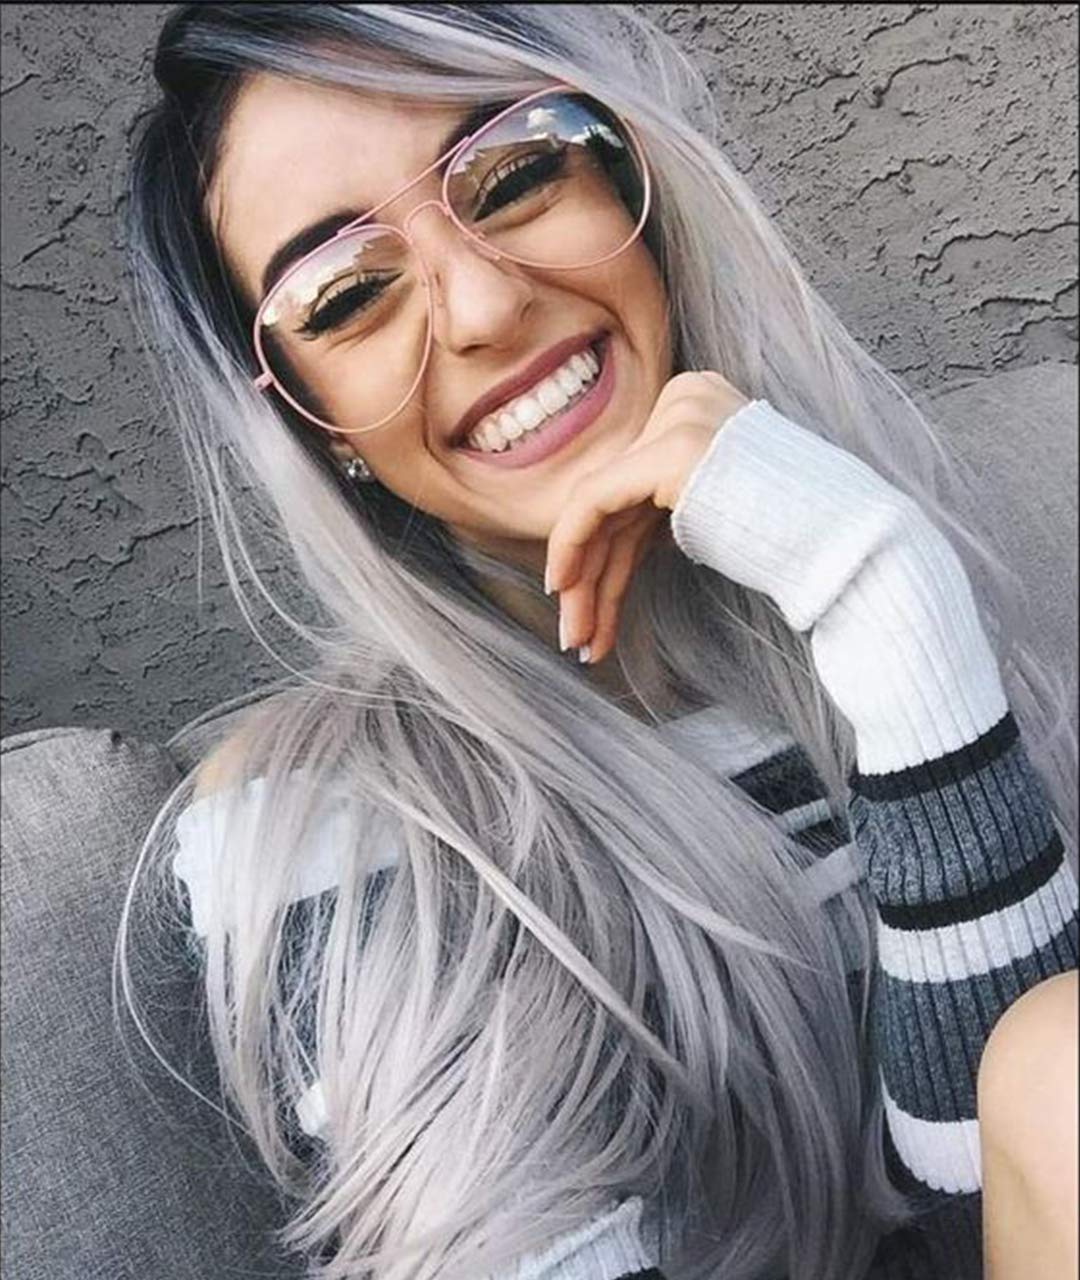 Price:$37.99     Zenith Grey Lace Front Wigs for Women Black Rooted Silver Grey Hair Wig Natural Weave Long Wigs with Black Roots Middle Part 22 inch Best Affordable Wigs for Daily Use   Beauty